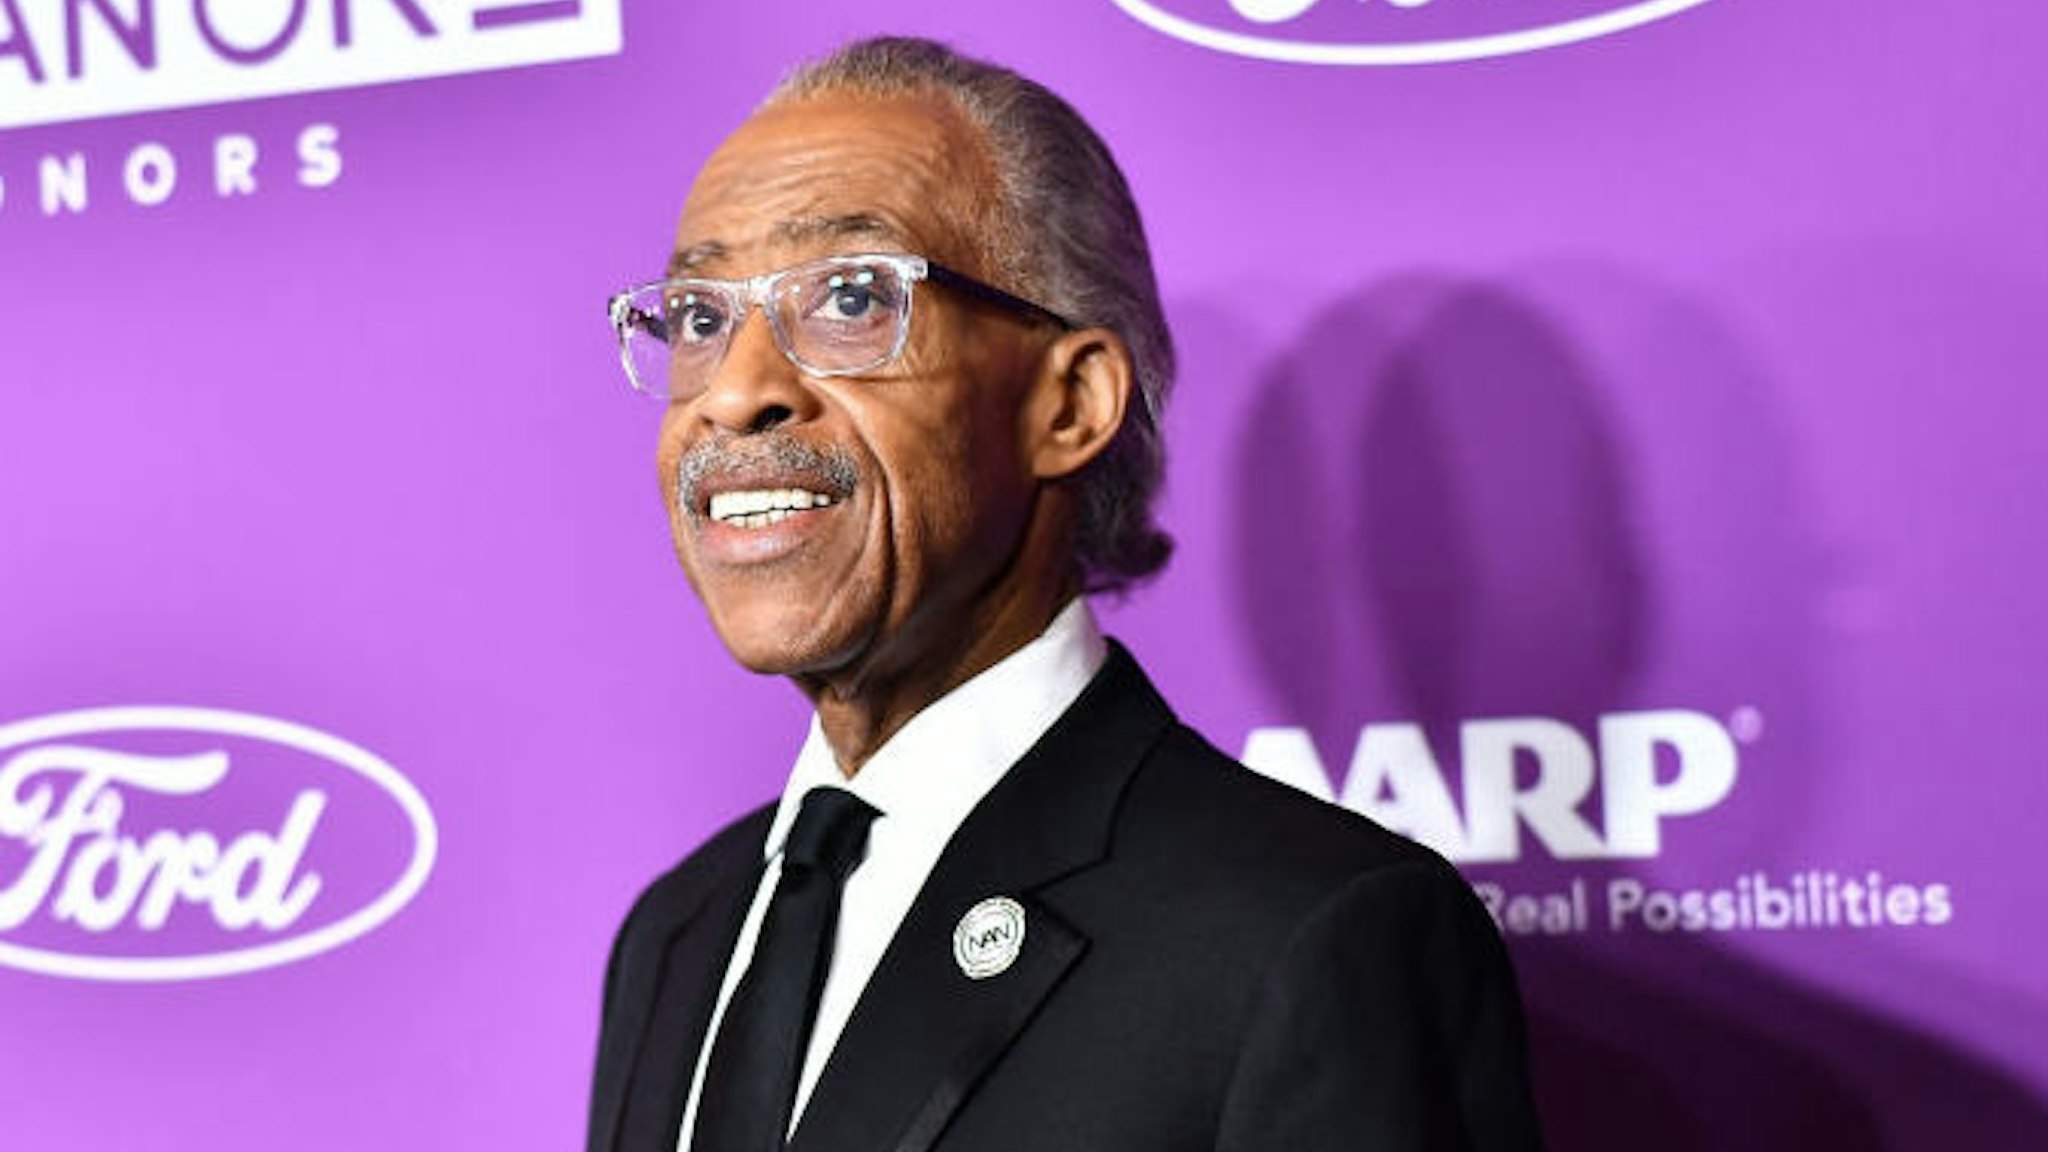 Al Sharpton attends 2019 Urban One Honors at MGM National Harbor on December 05, 2019 in Oxon Hill, Maryland.